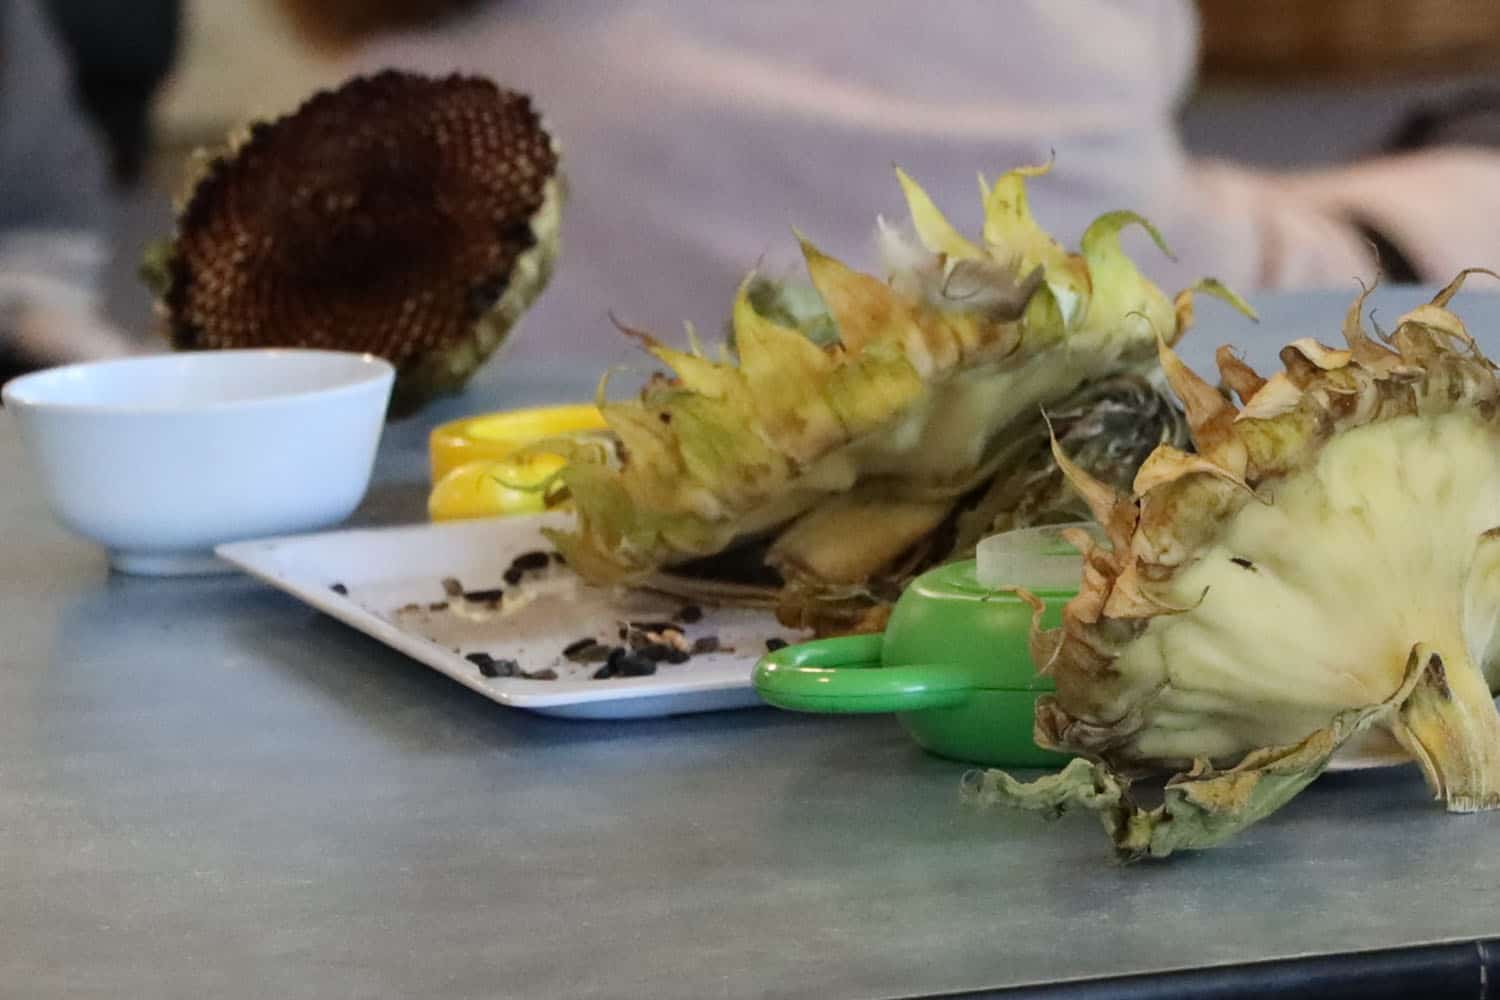 sunflower heads on table for children to remove and view (science)